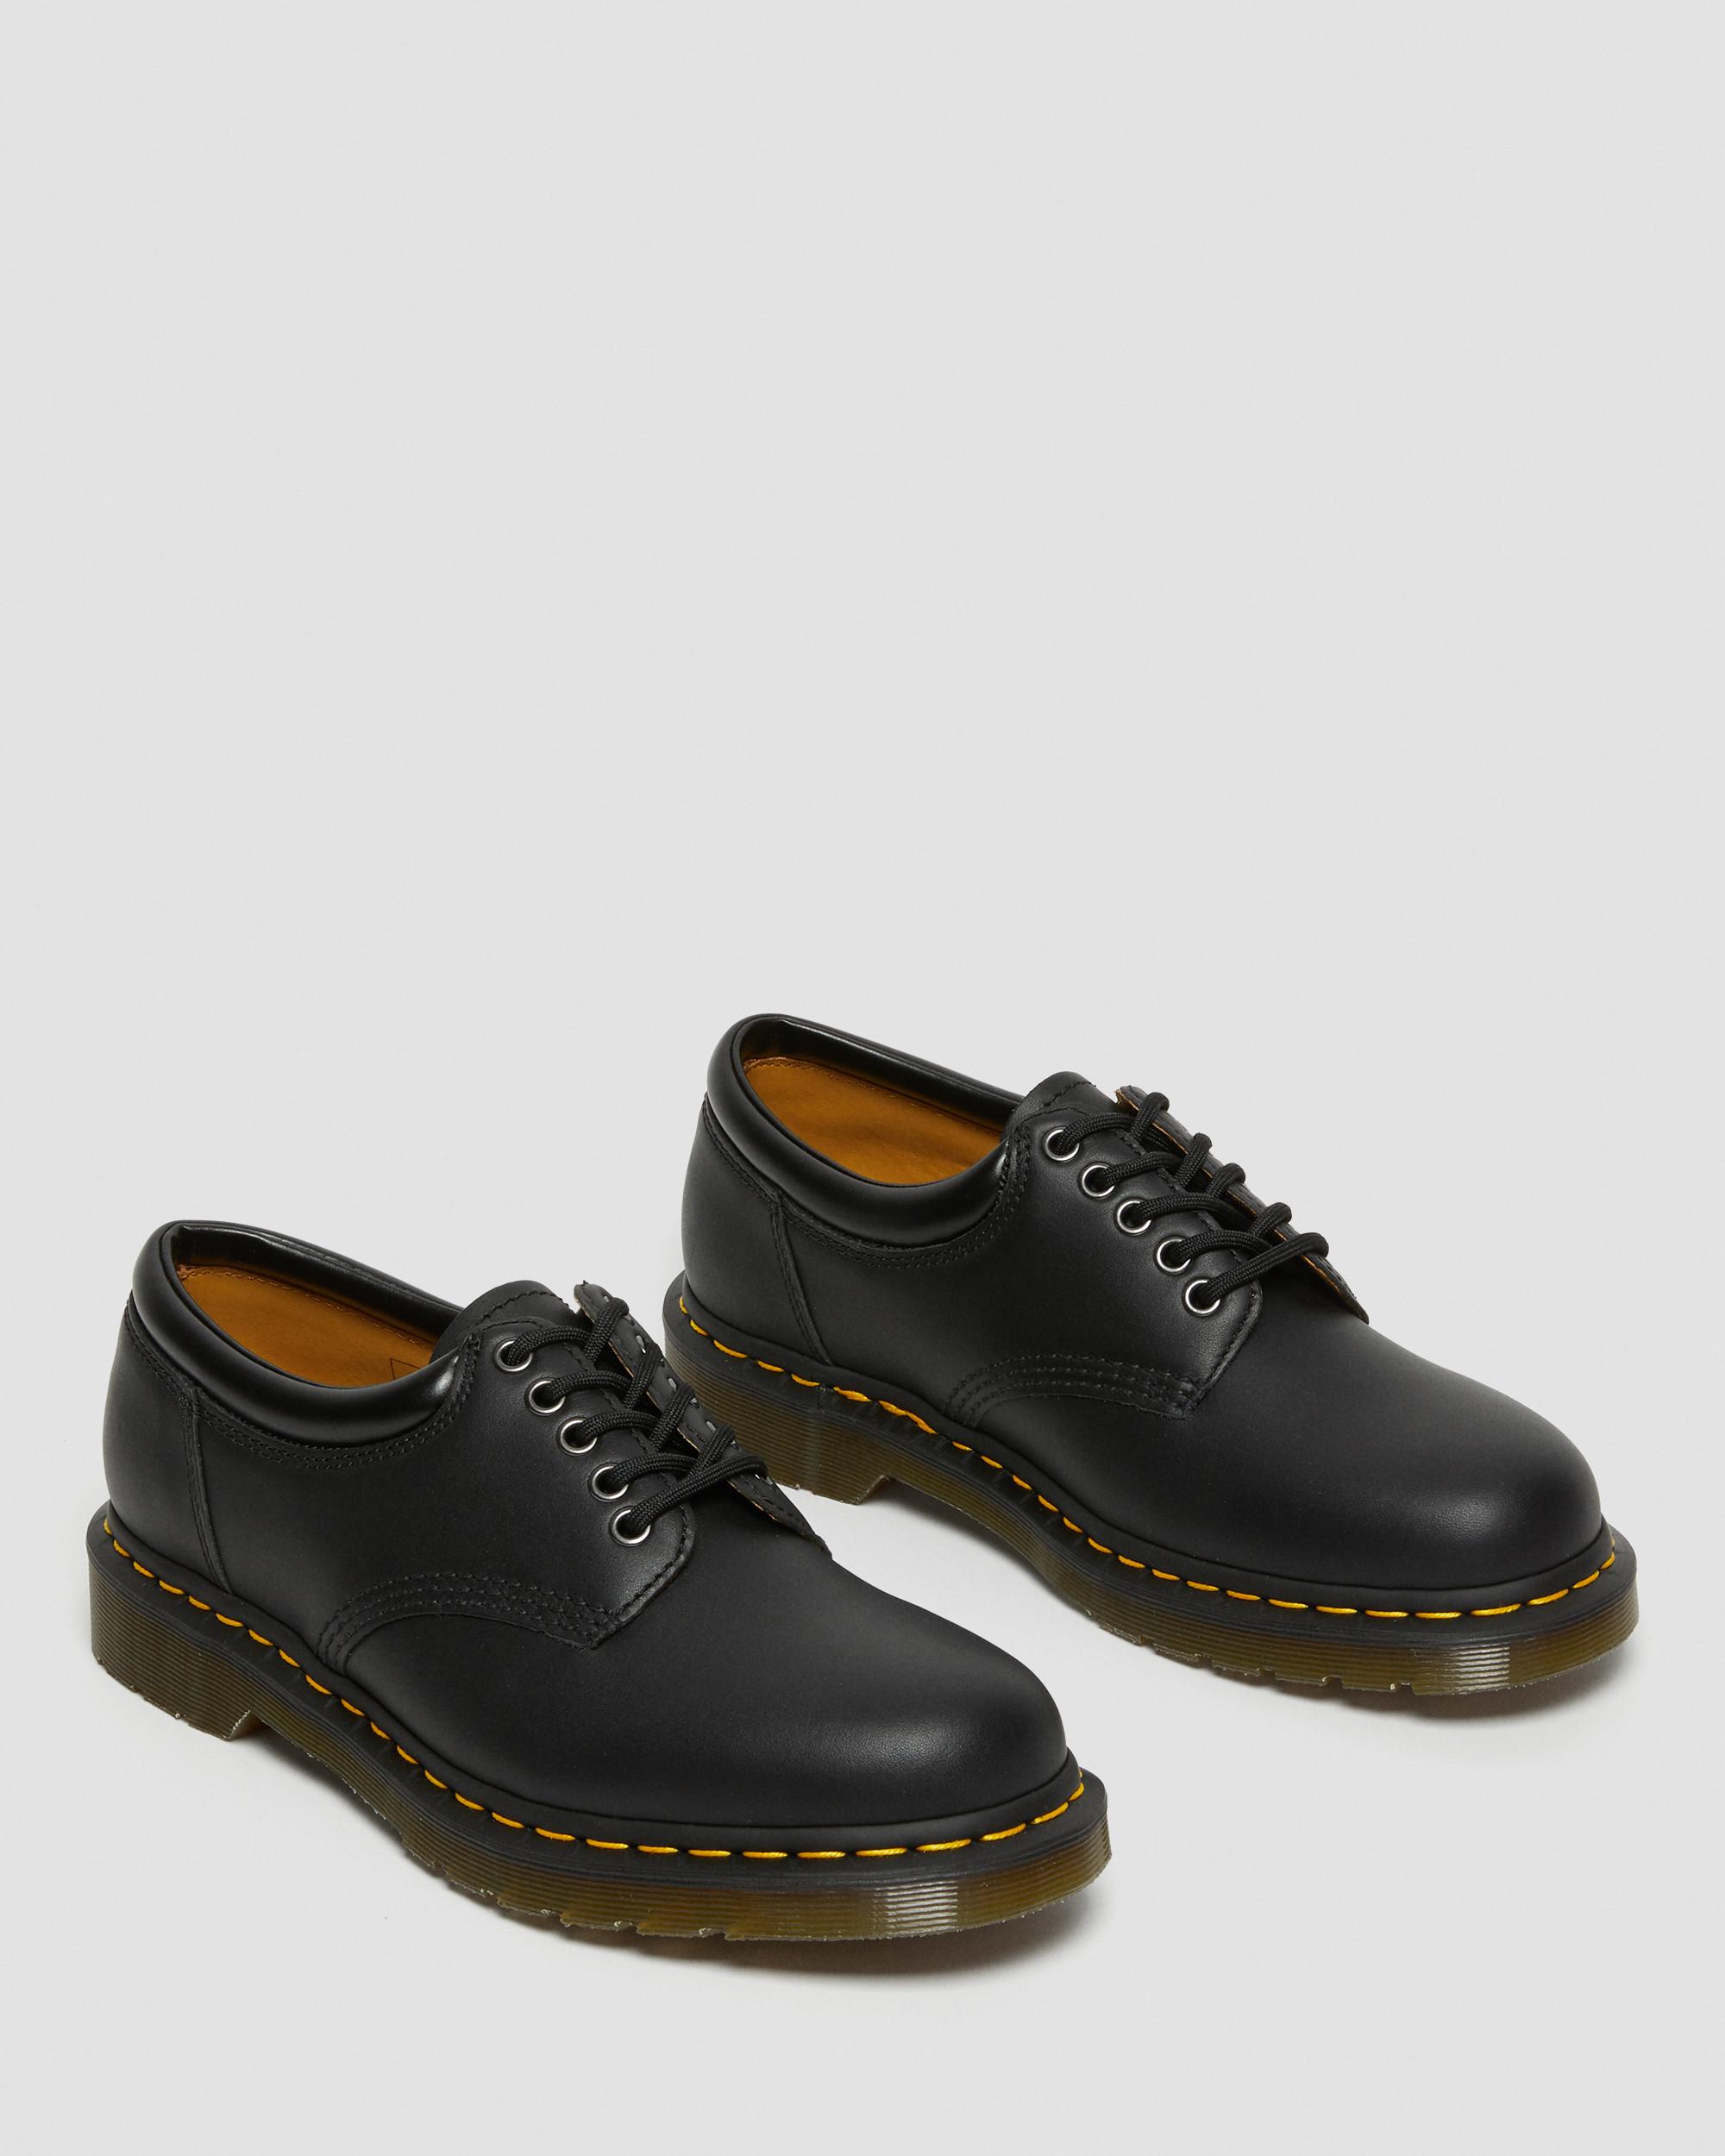 8053 Nappa Leather Casual Shoes in Black